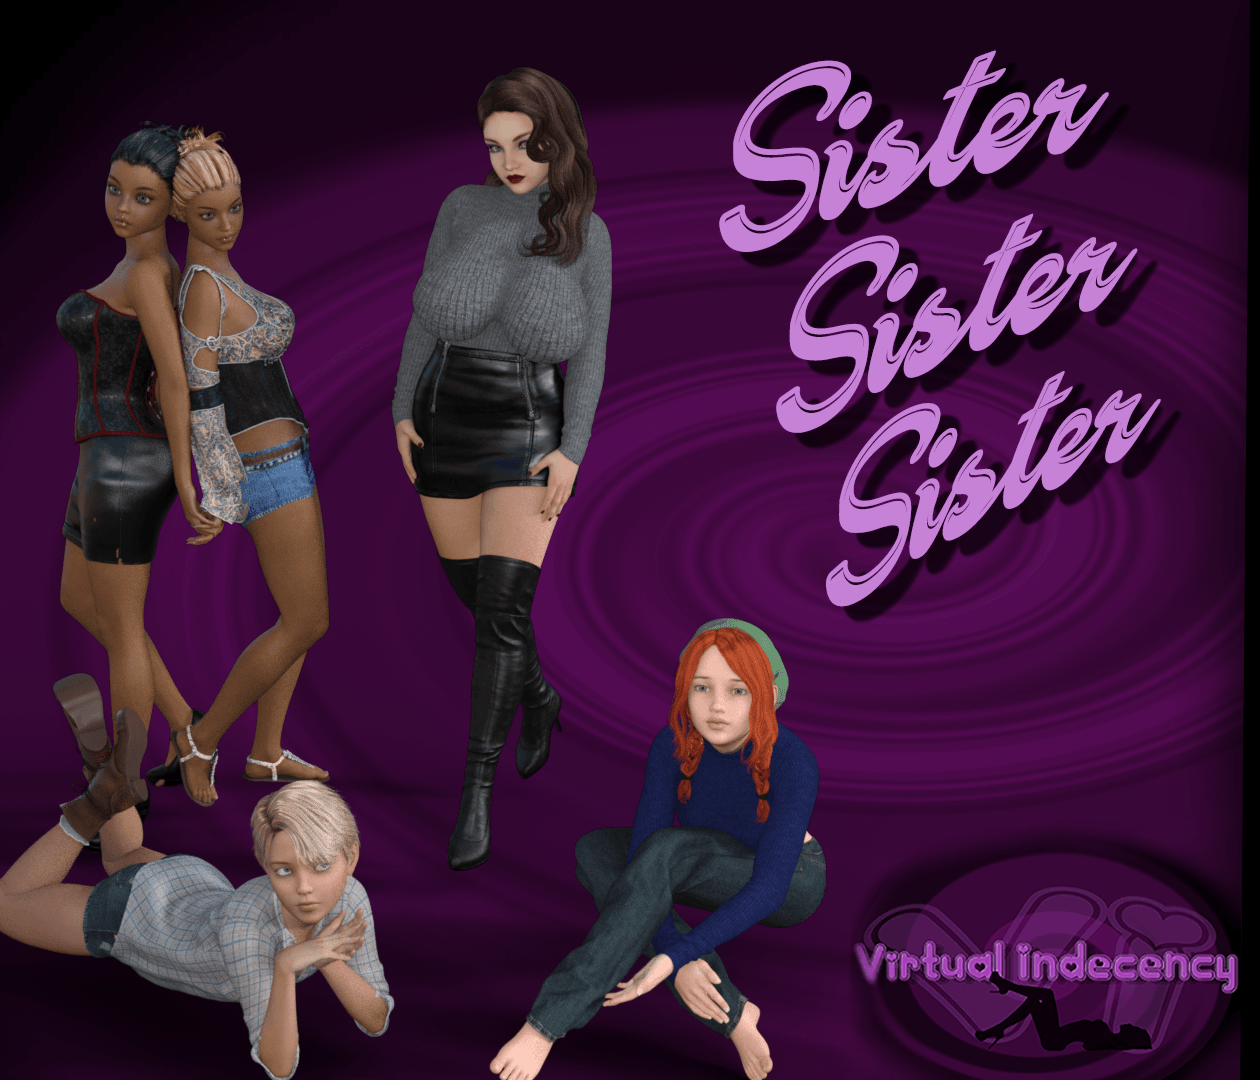 Sister, Sister, Sister – Chapter 3 SE - Free incest porn PC game 7